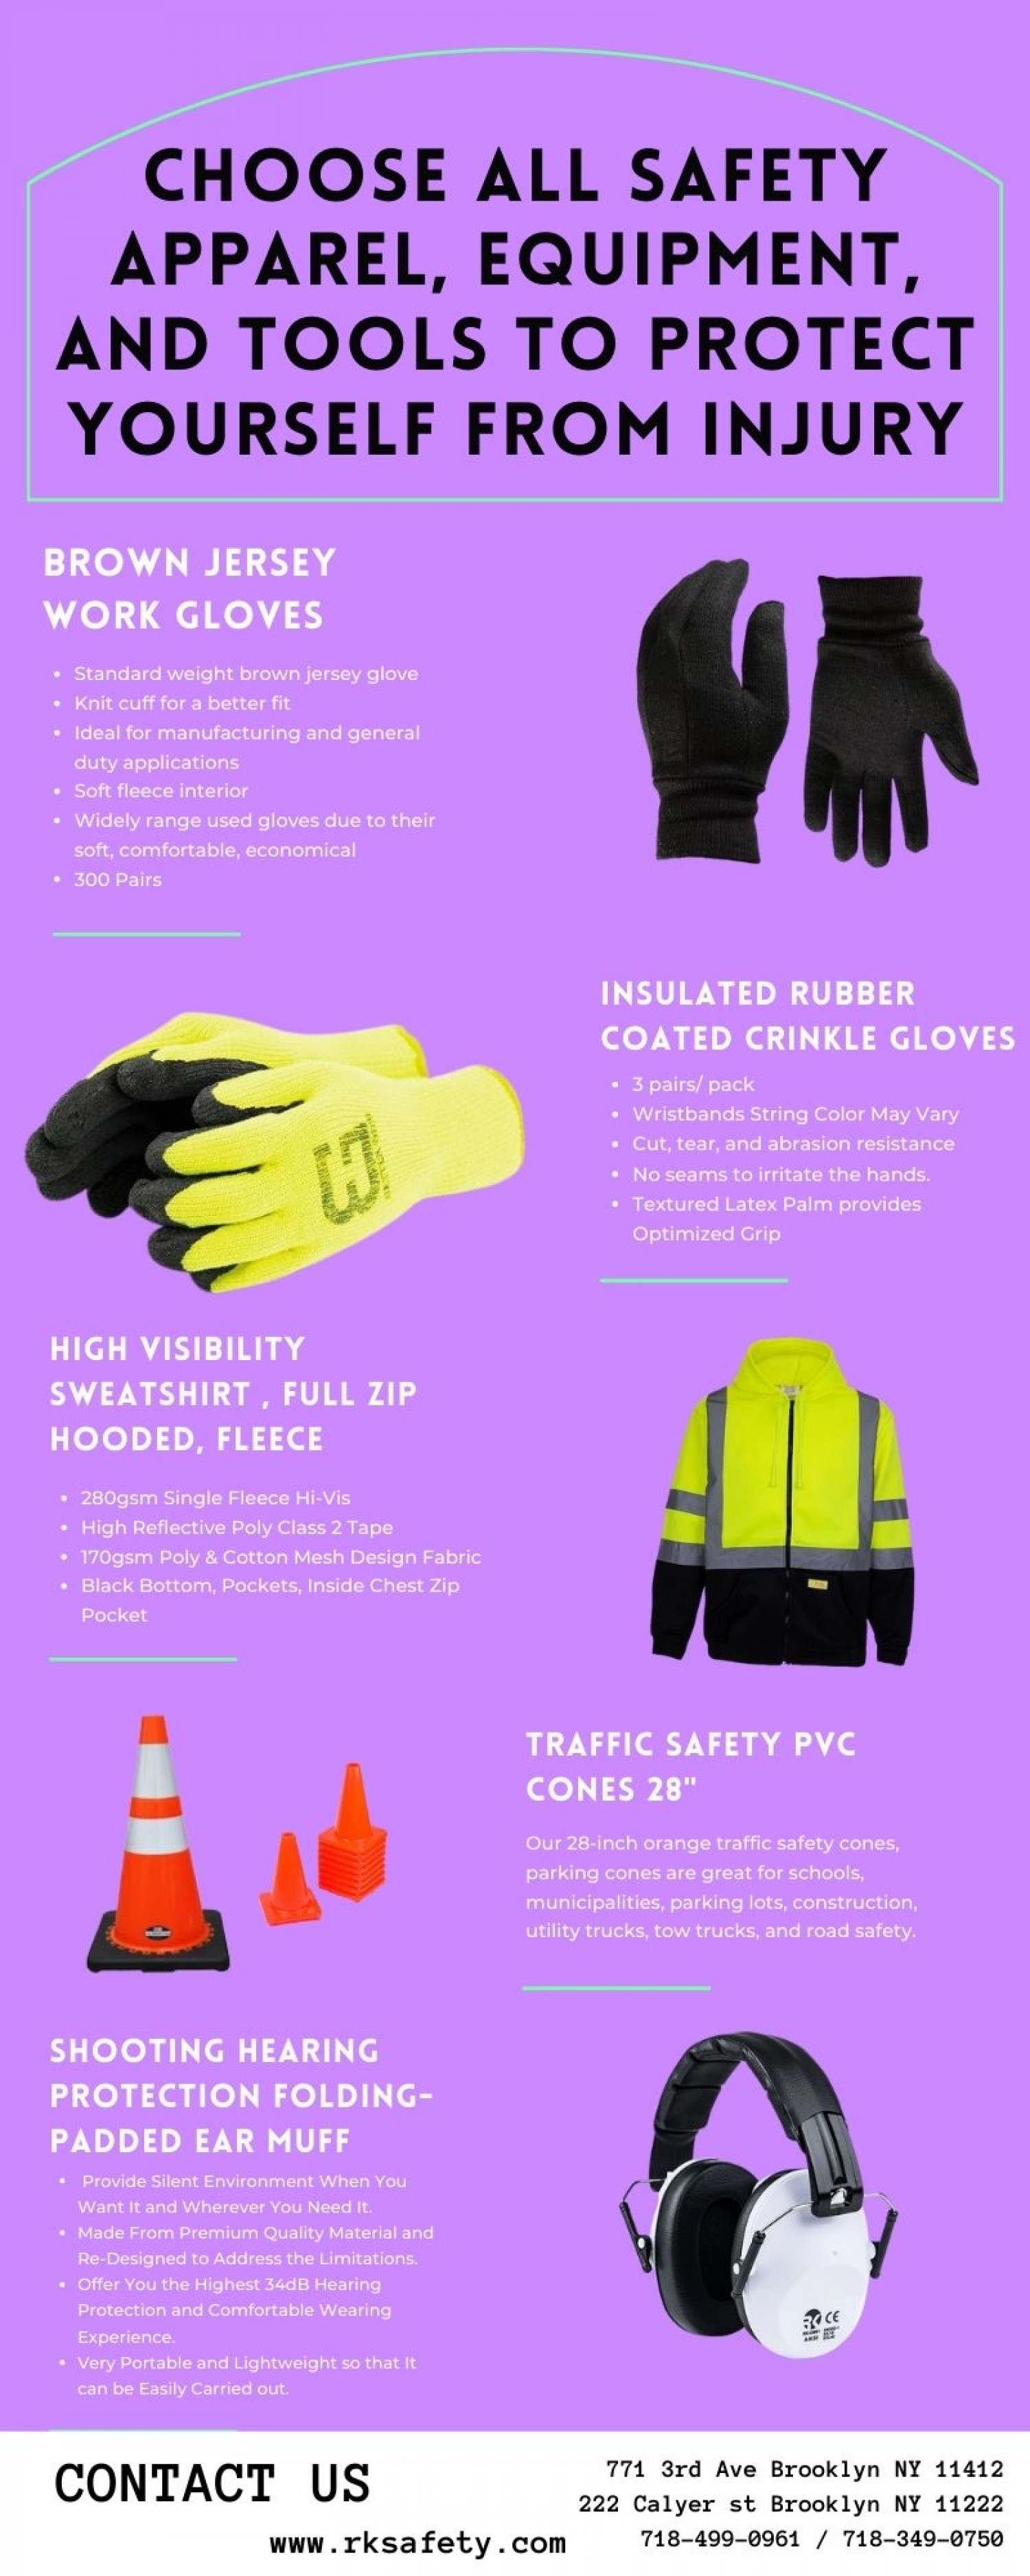 Get All Variety Work Gloves with RK Safety Infographic